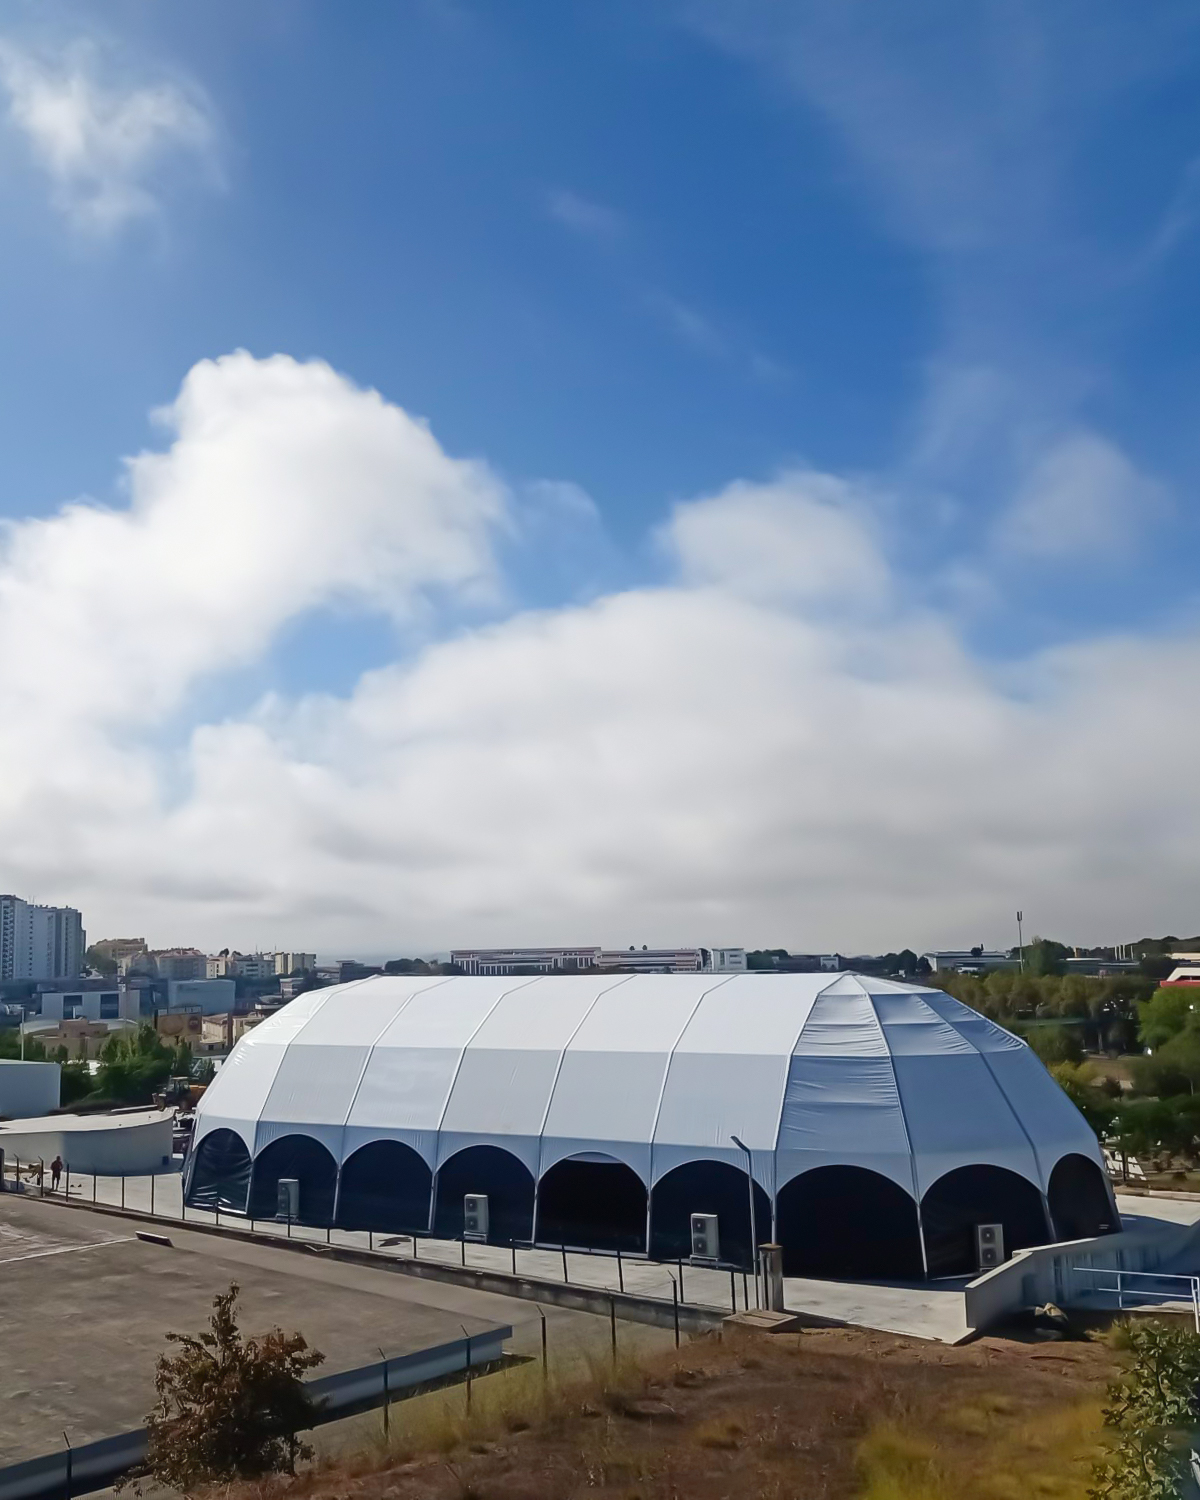 Installing a polygonal igloo tent for Amadora BD event